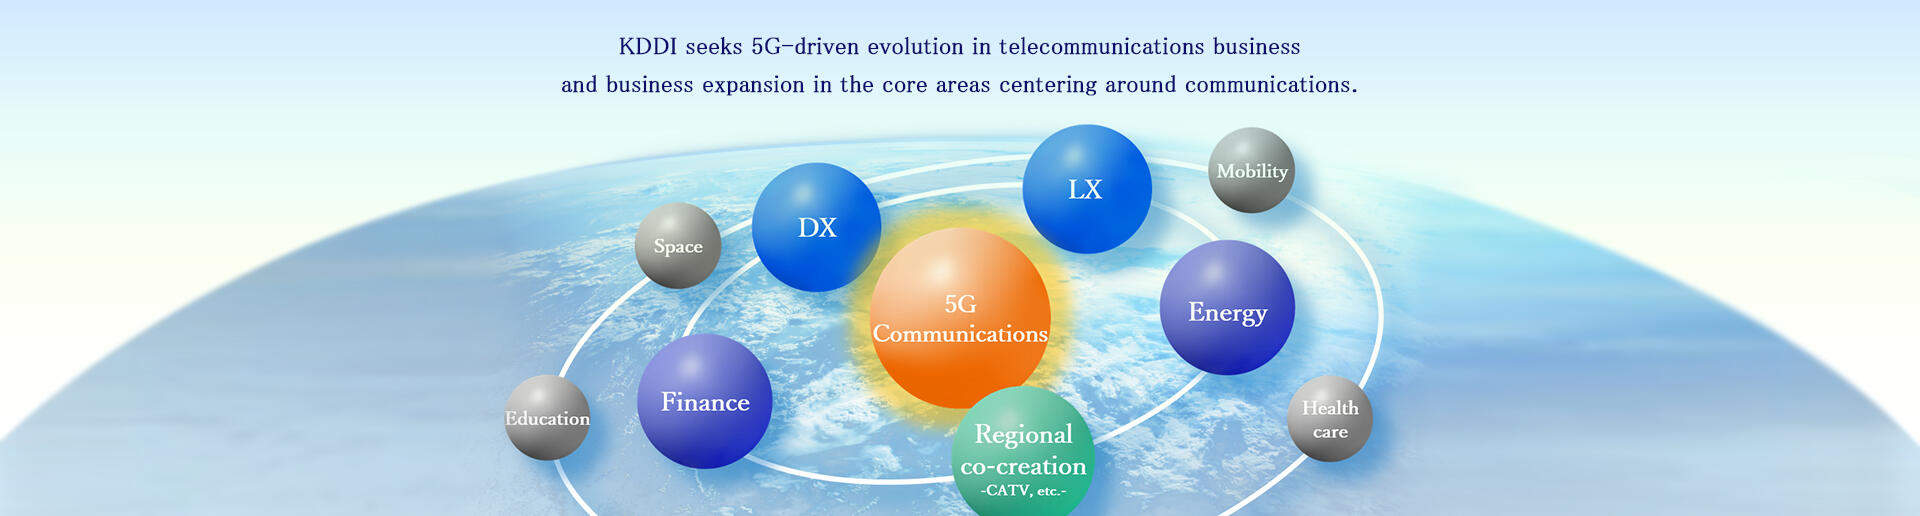 KDDI seeks 5G-driven evolution in telecommunications business and business expansion in the core areas centering around communications.